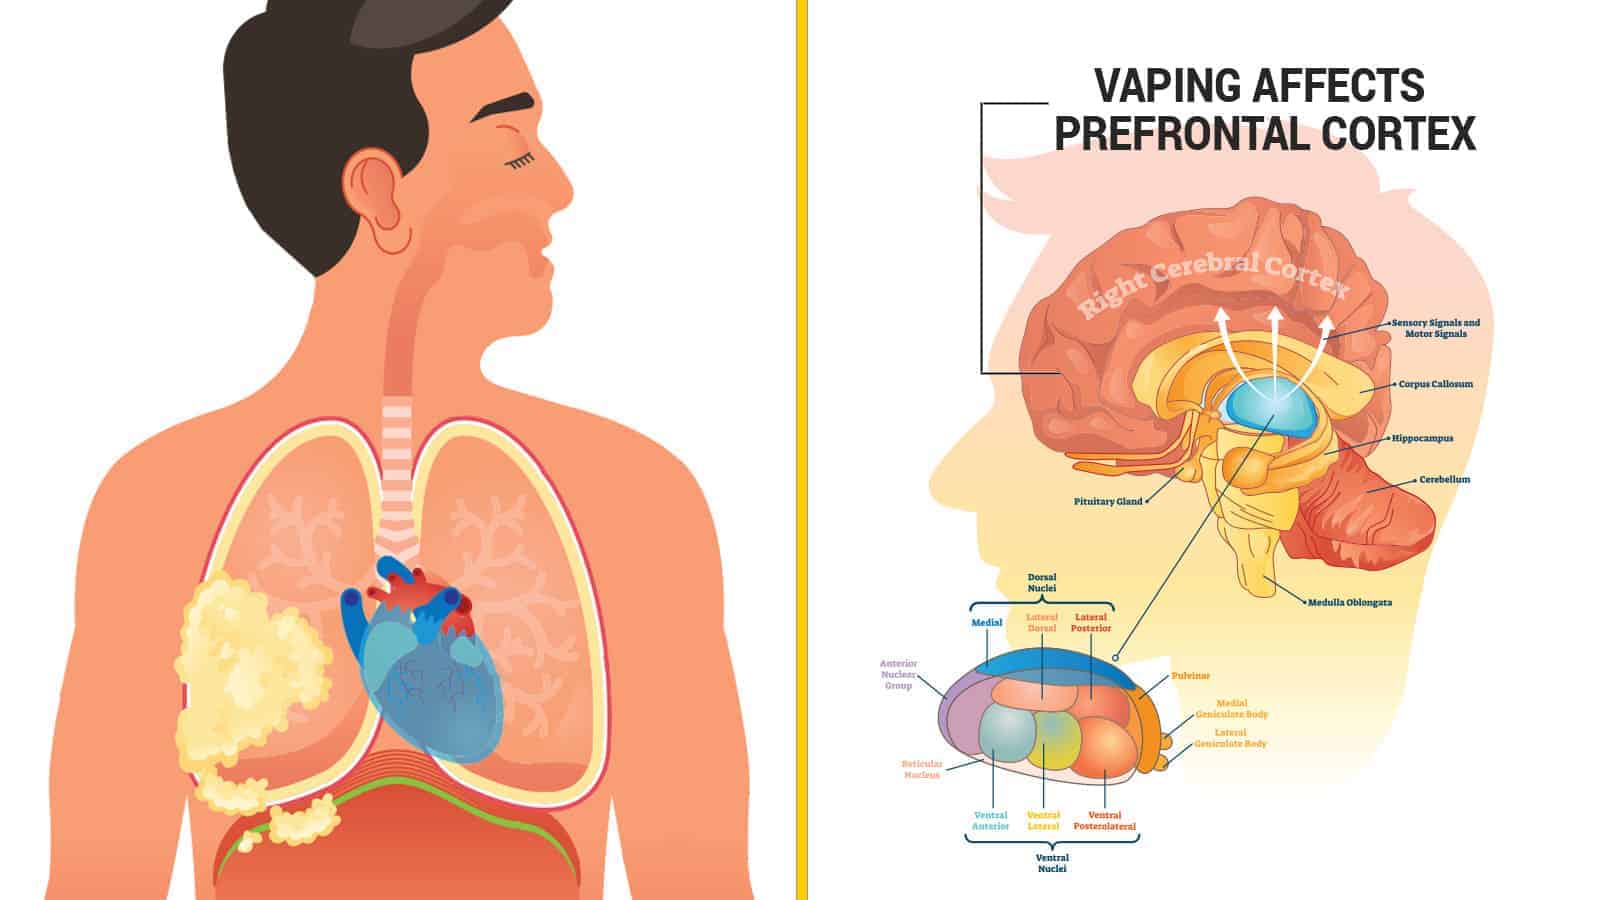 Researchers Reveal How Vaping Causes Brain and Lung Damage